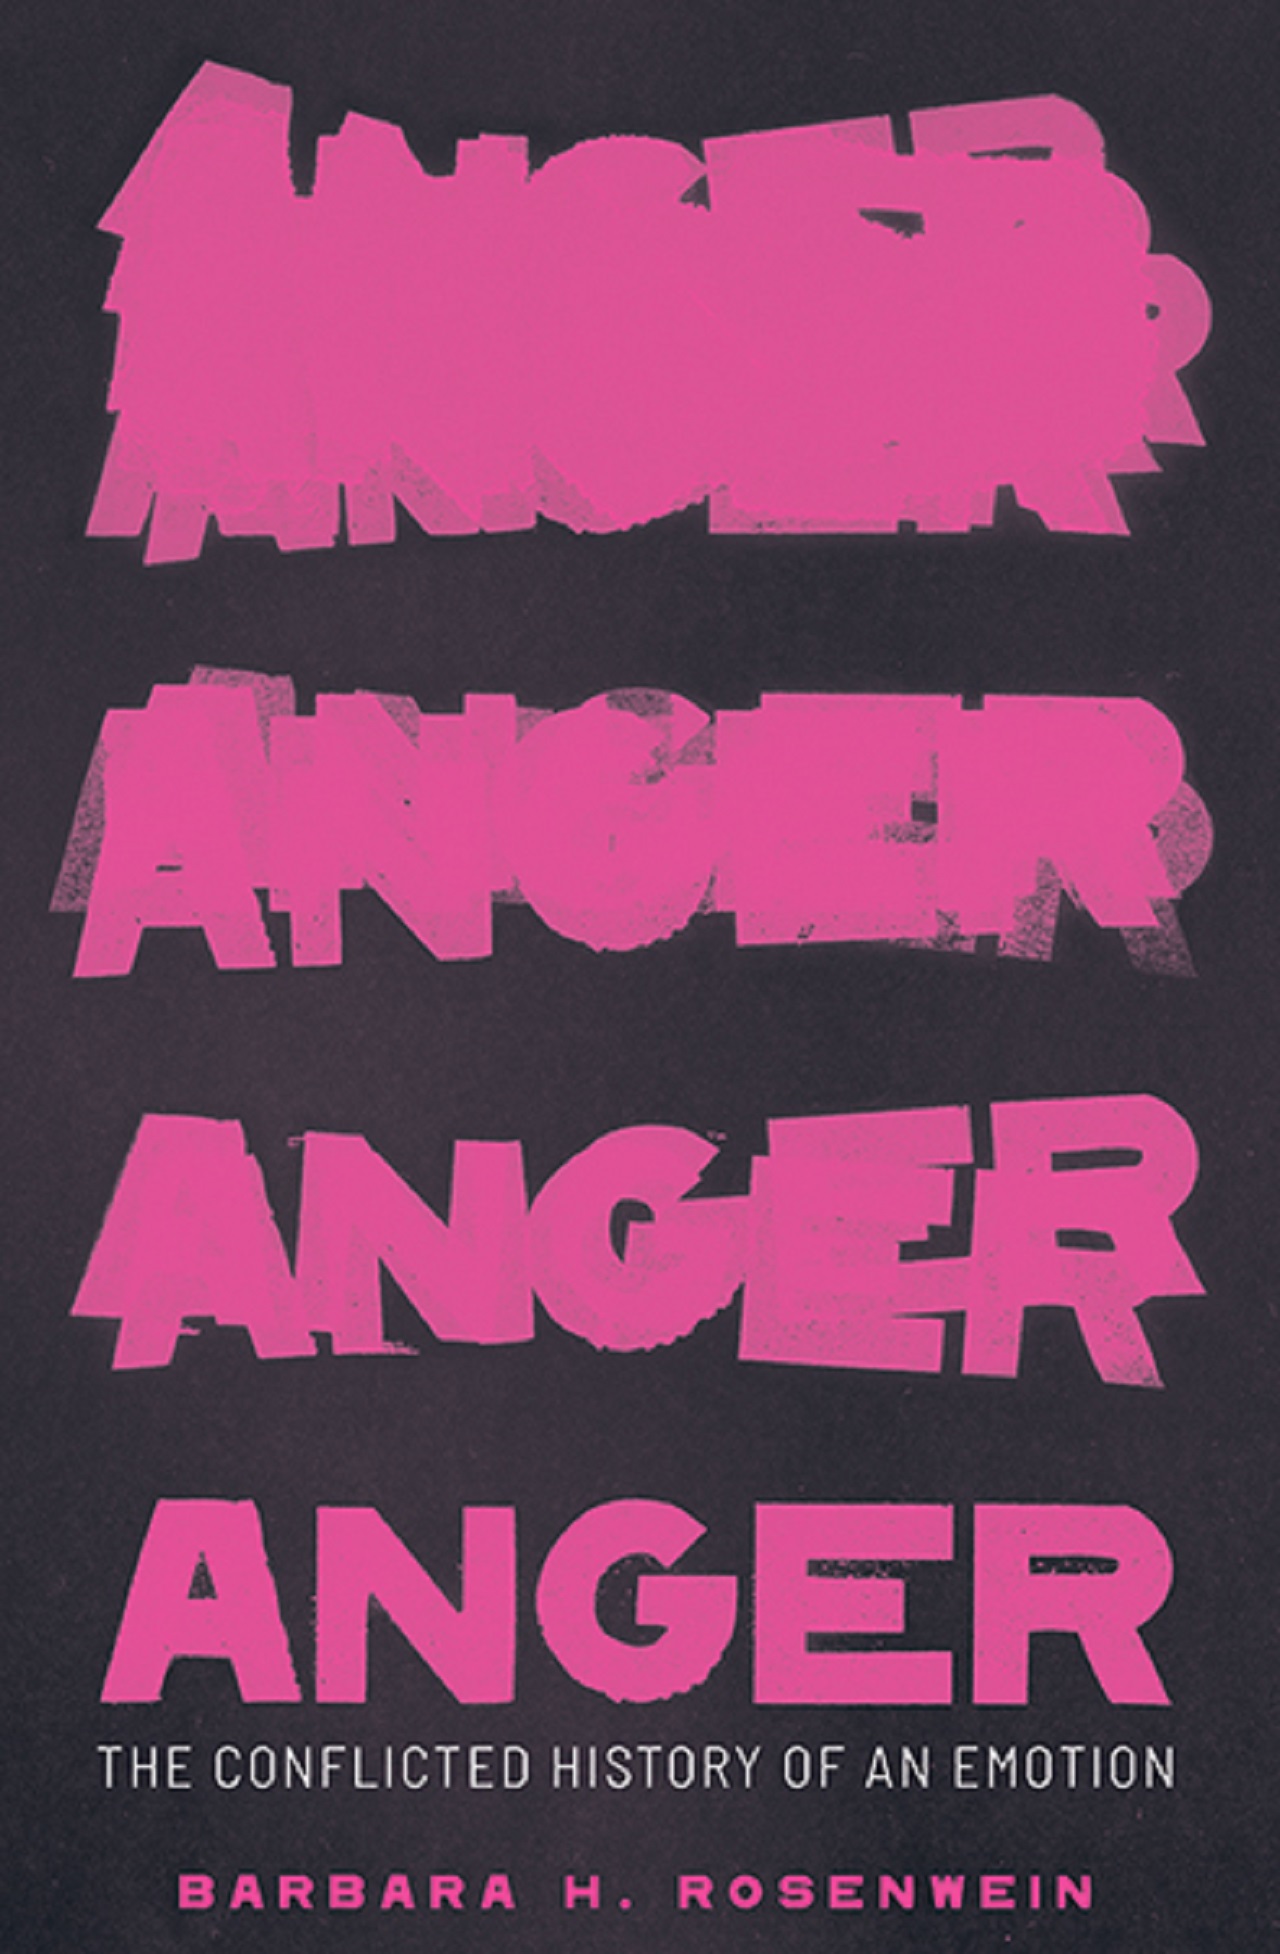 Anger: The Conflicted History of an Emotion (Yale University Press, 2020)